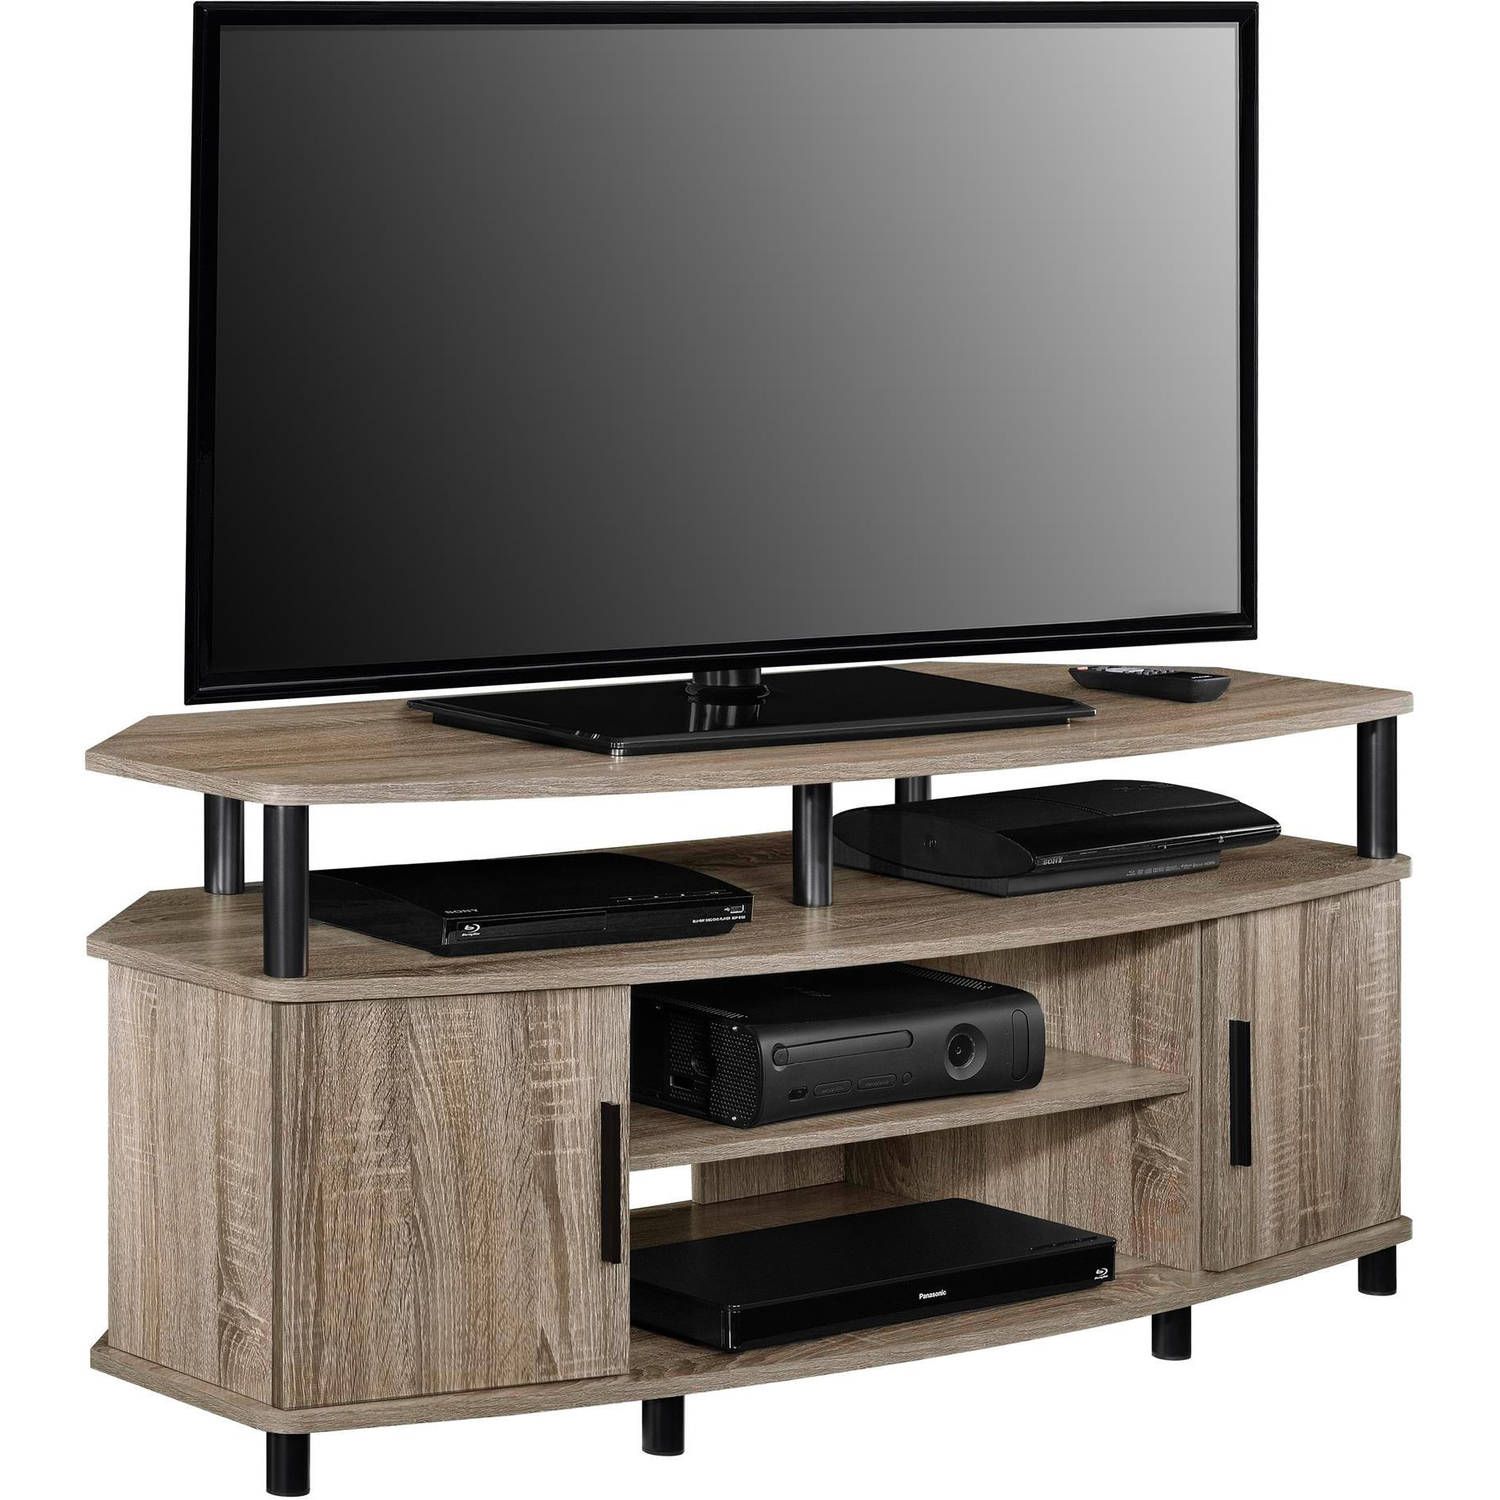 Corner Tv Stand Media Console For Flat Screens Sonoma Oak Intended For Flat Screen Tv Stands Corner Units (View 3 of 15)